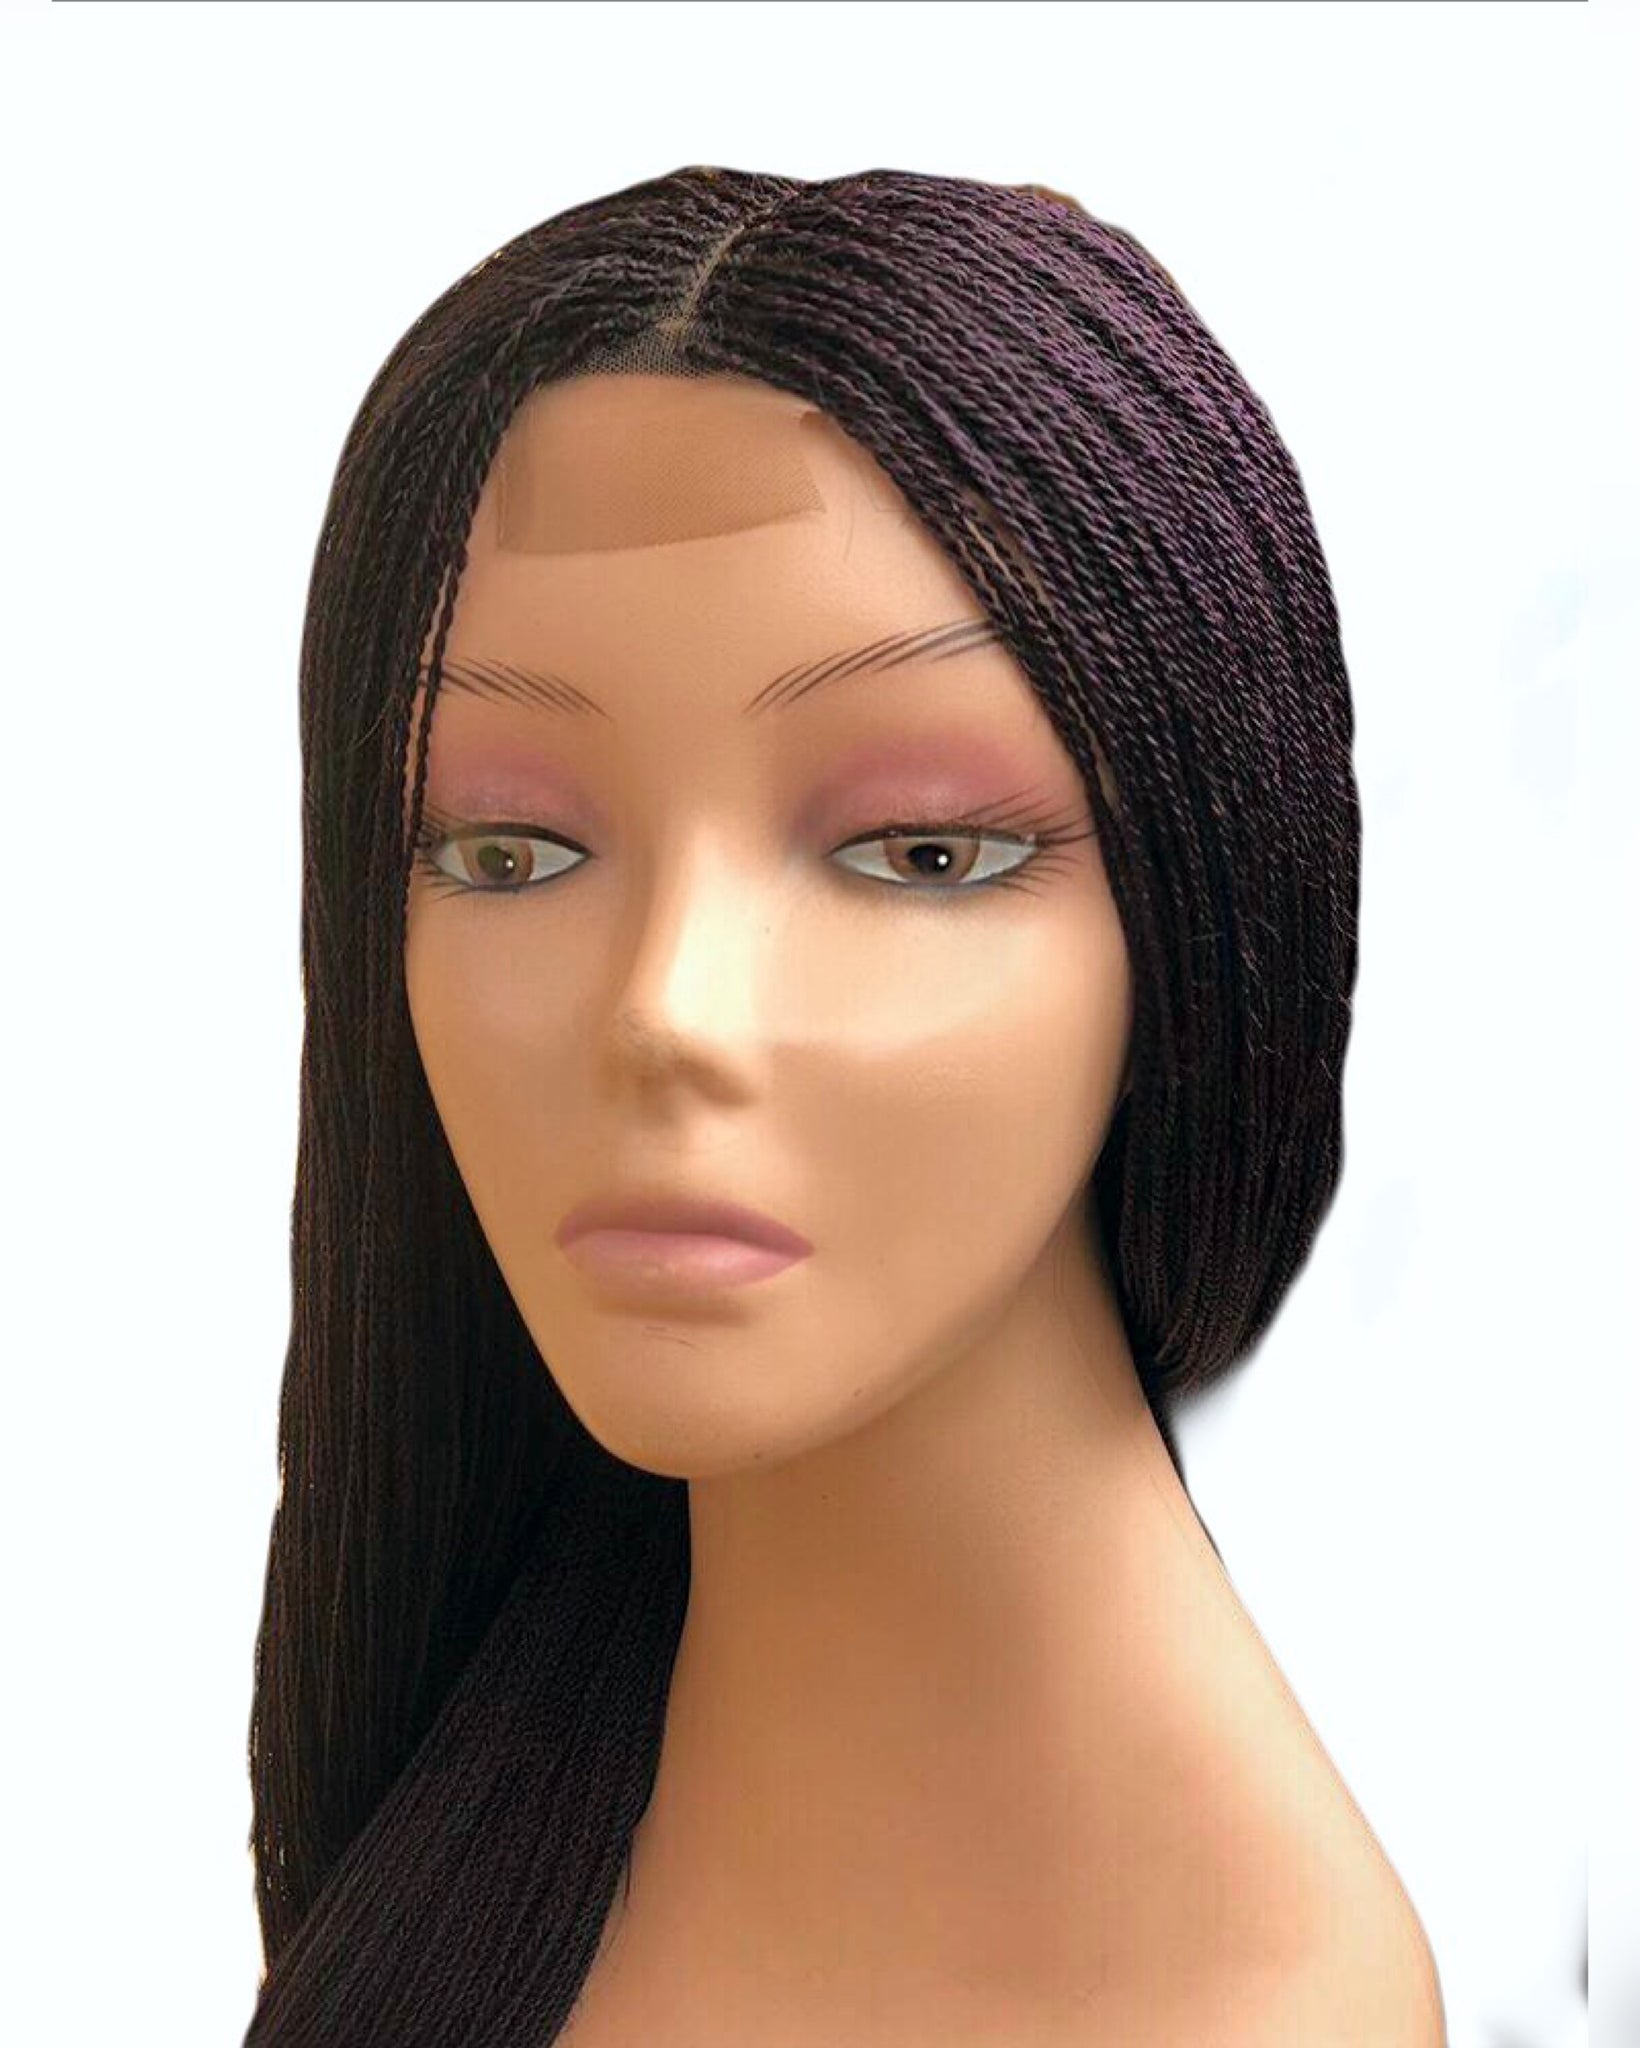 2x4 Lace Braided Wig Blue With Elastic Band Colours With Baby Hair